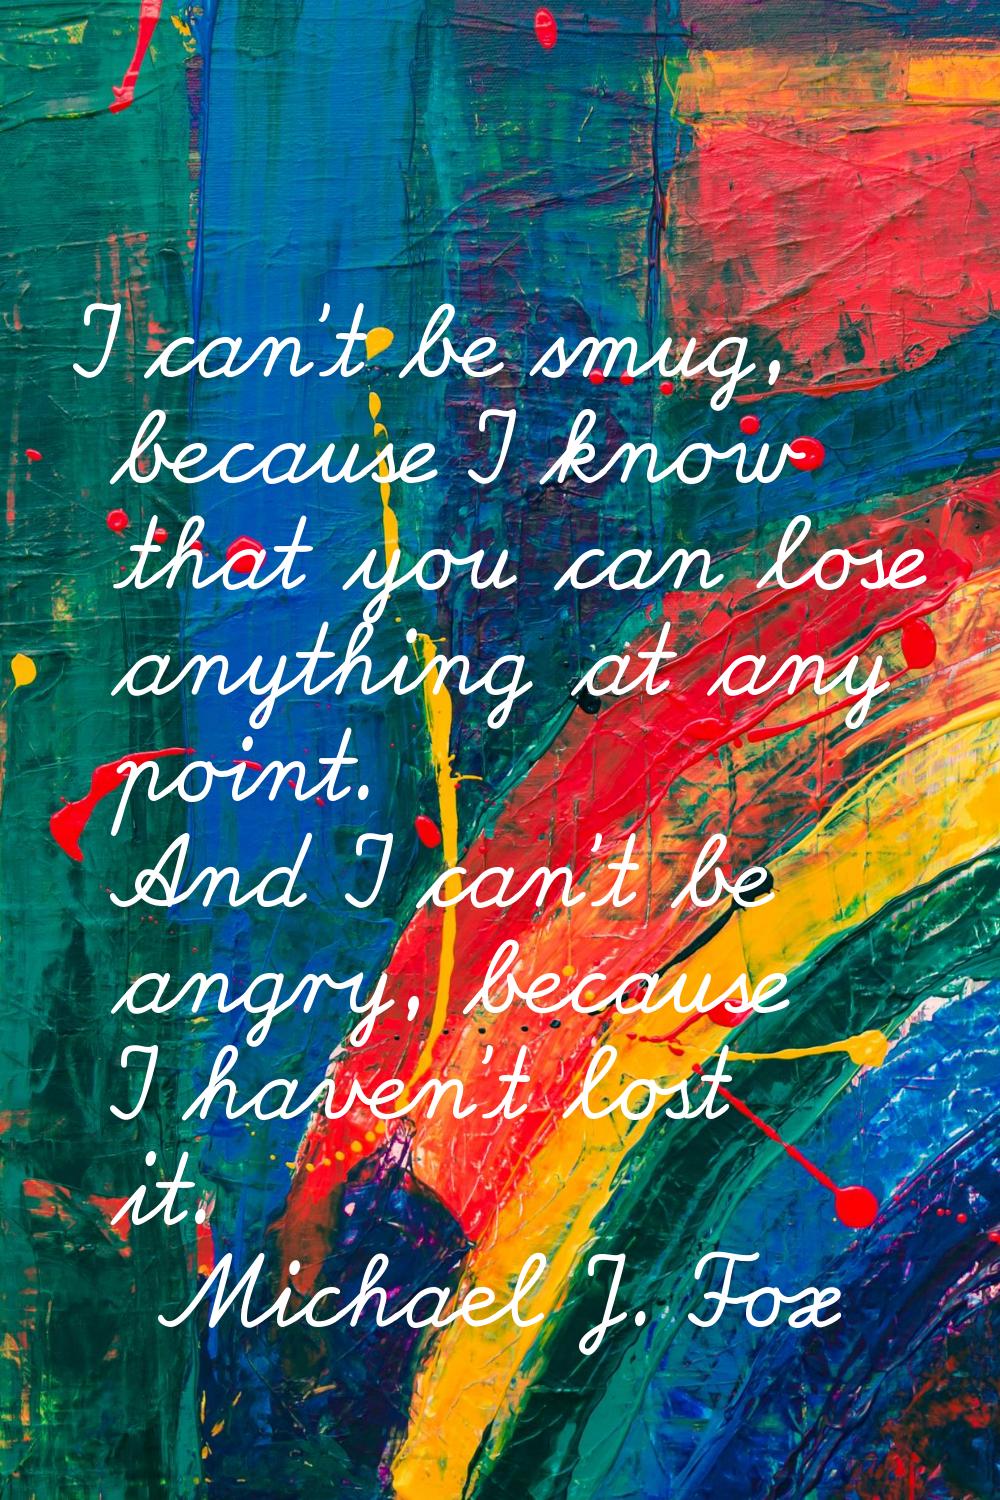 I can't be smug, because I know that you can lose anything at any point. And I can't be angry, beca